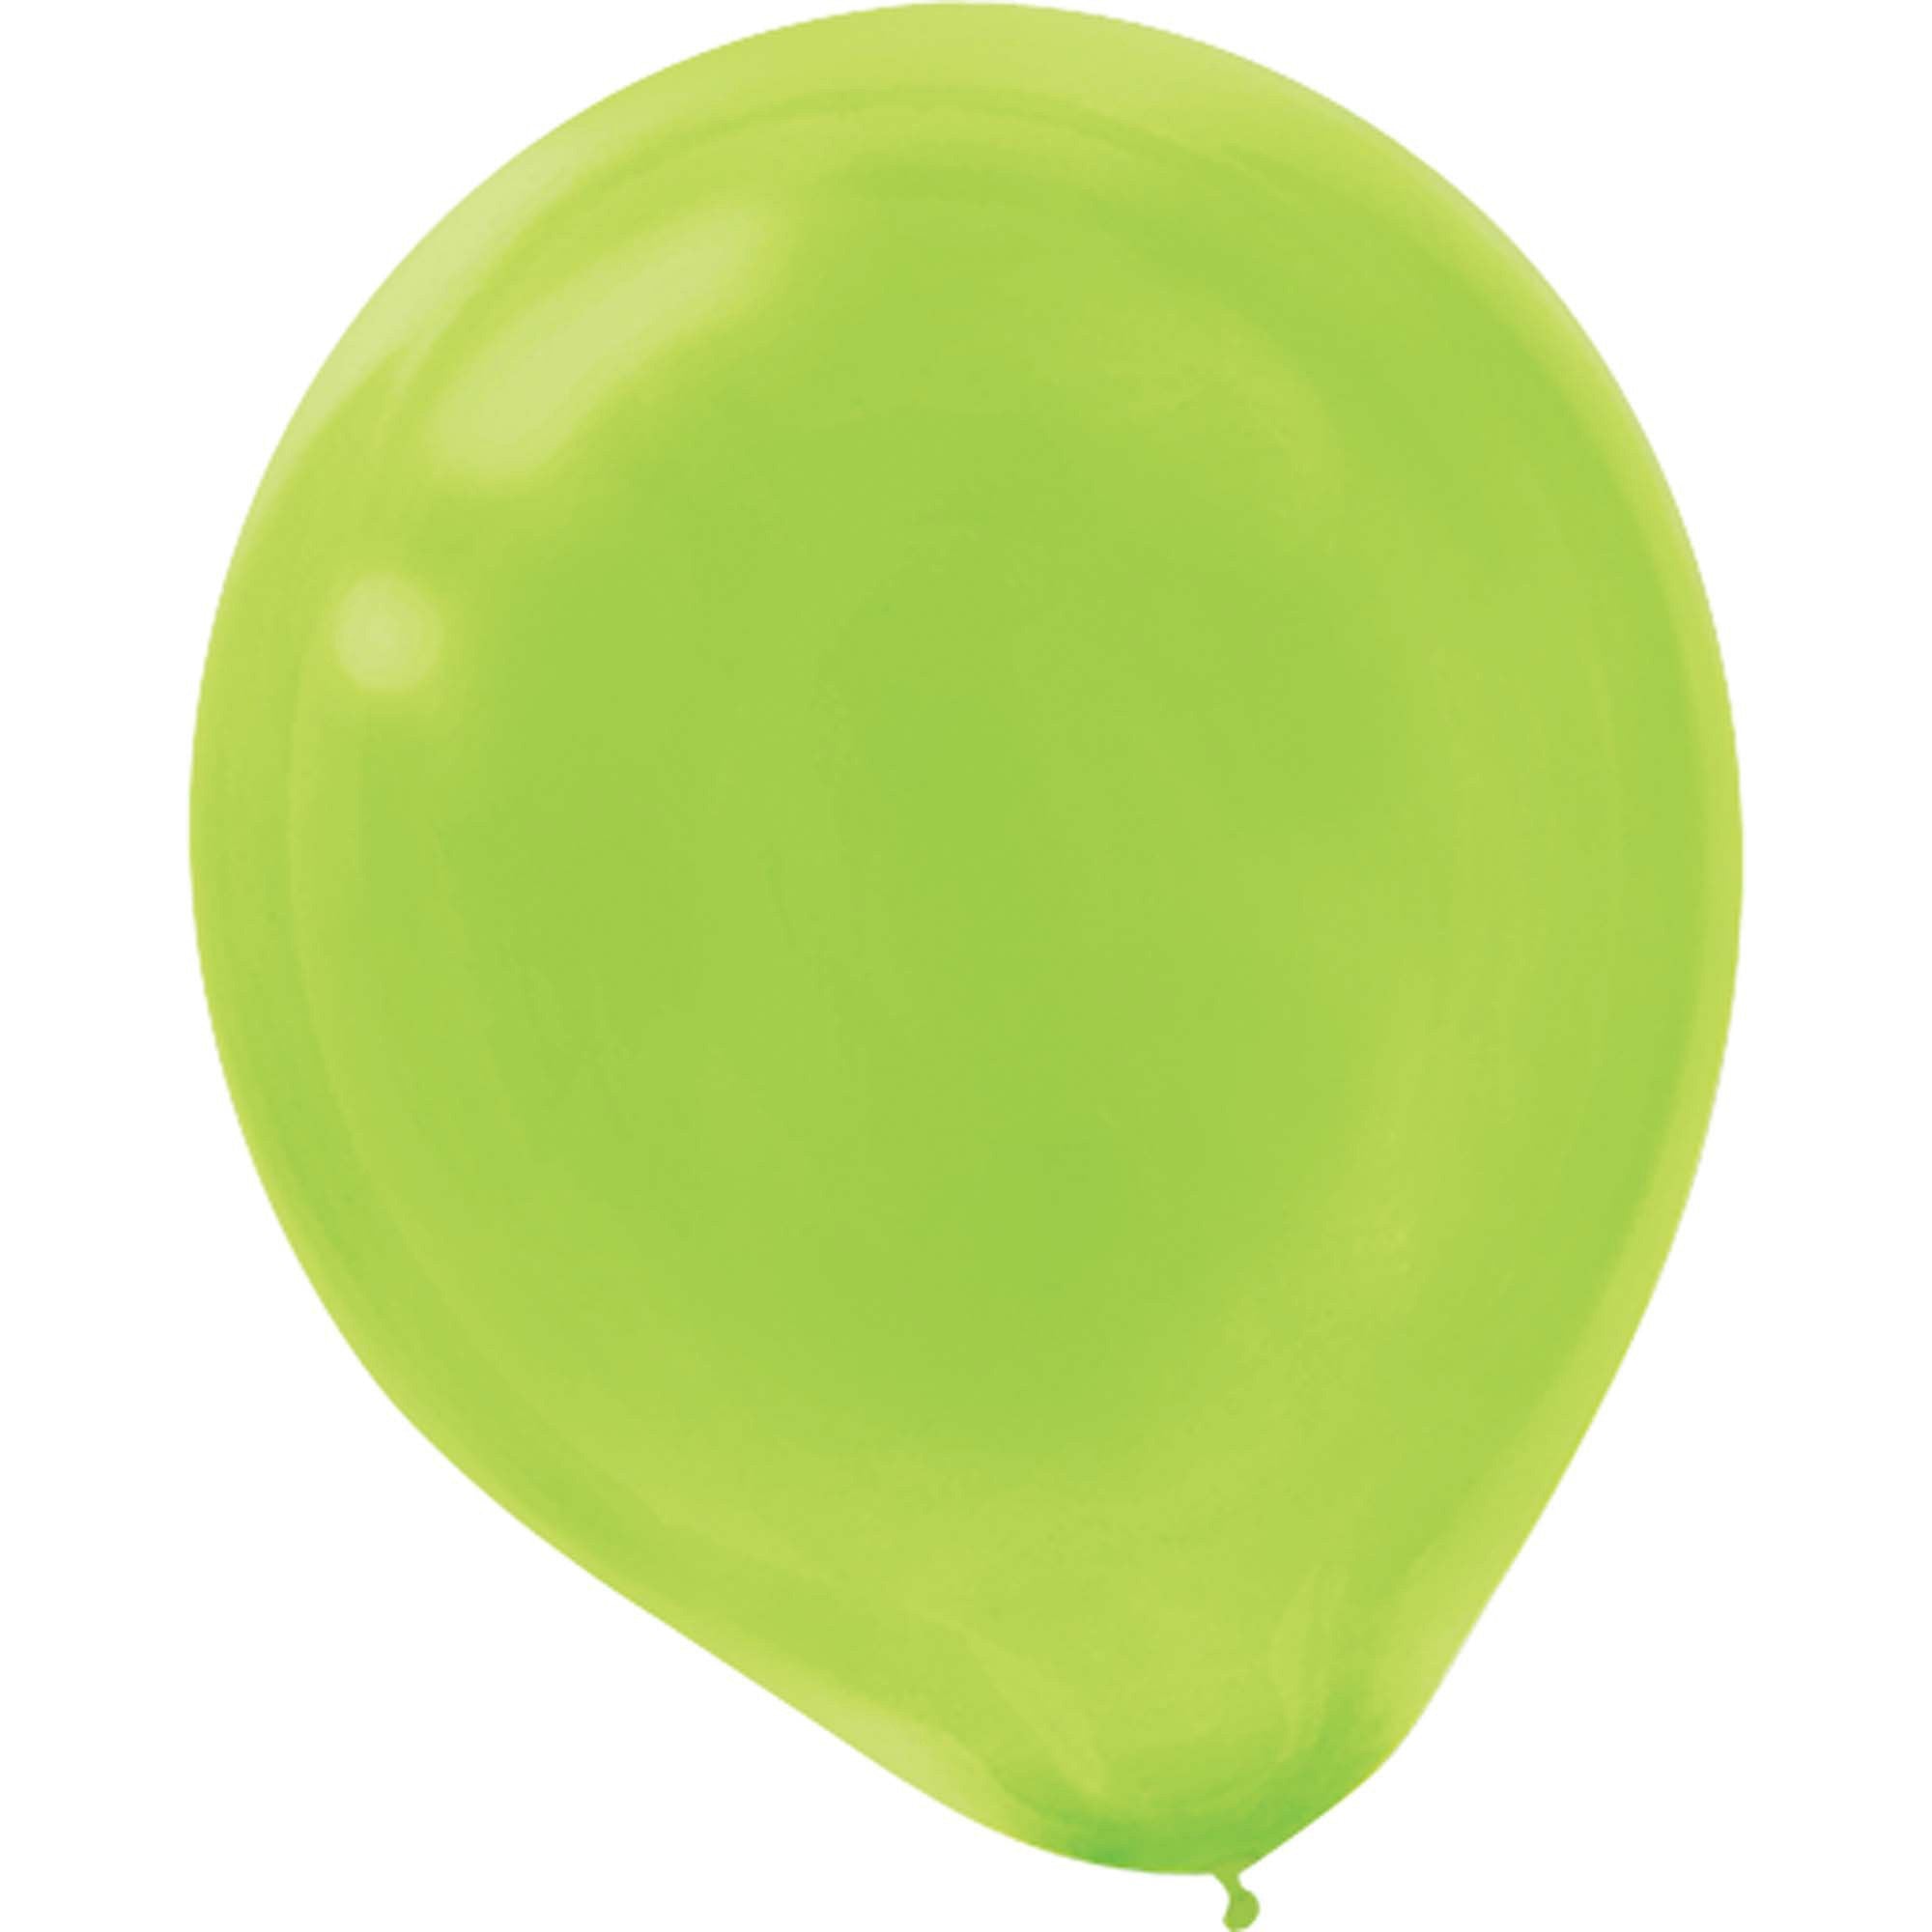 Standard Lime Green Latex Balloons 50pcs Balloons & Streamers - Party Centre - Party Centre